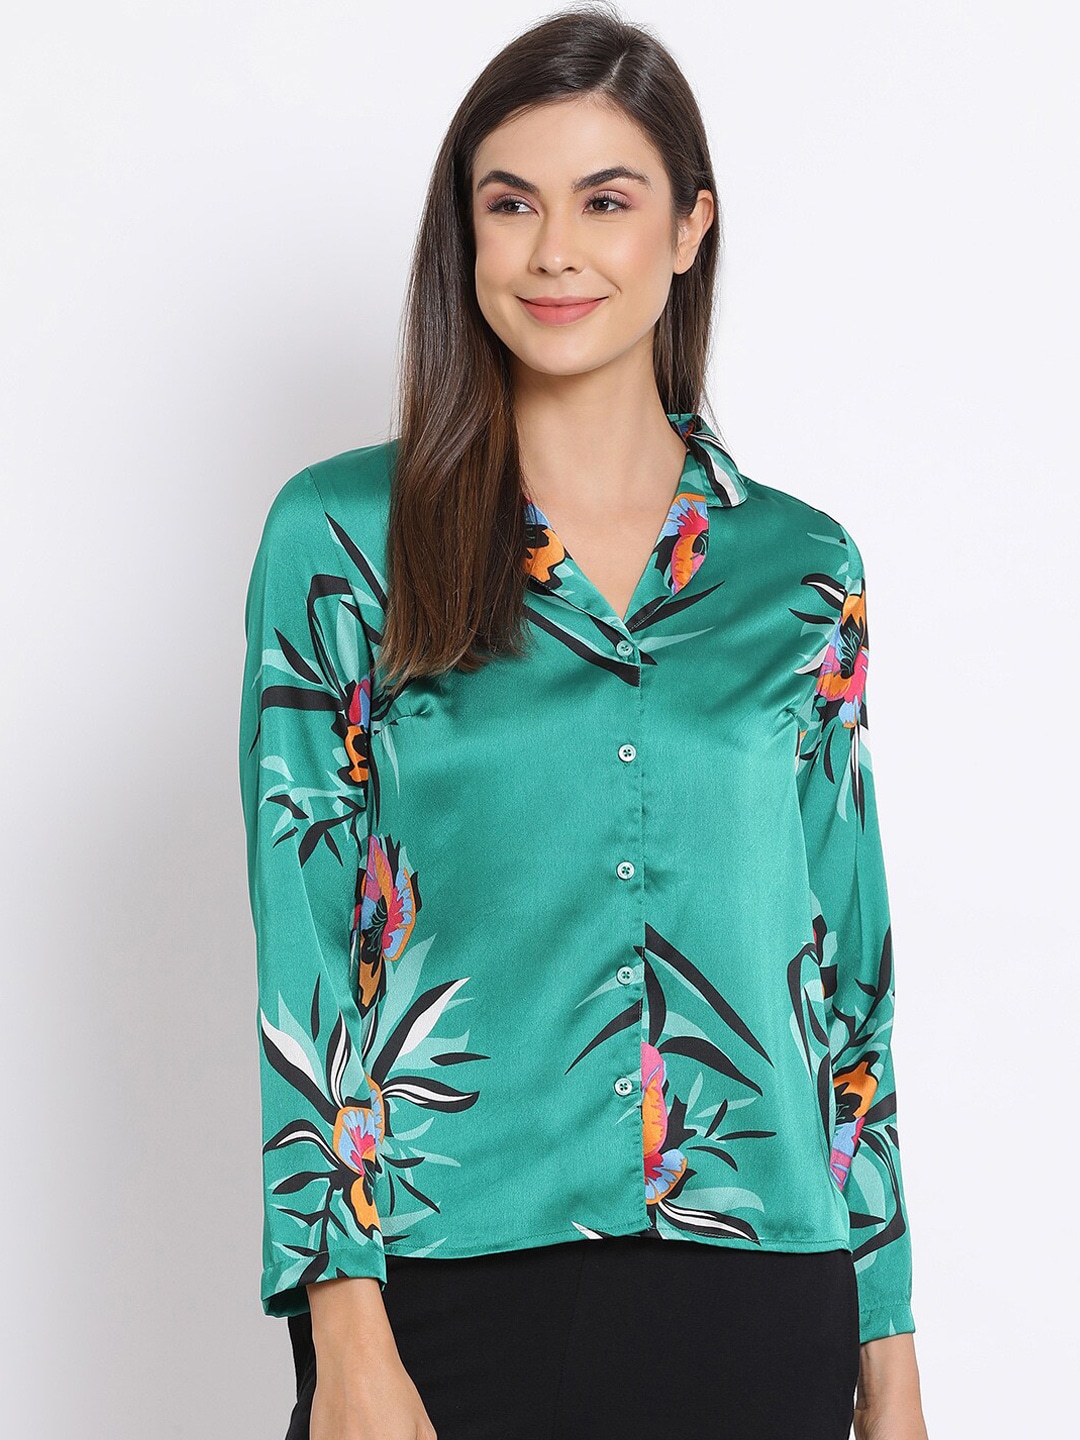 Oxolloxo Women Green & Black Tropical Printed Lounge Shirt Price in India